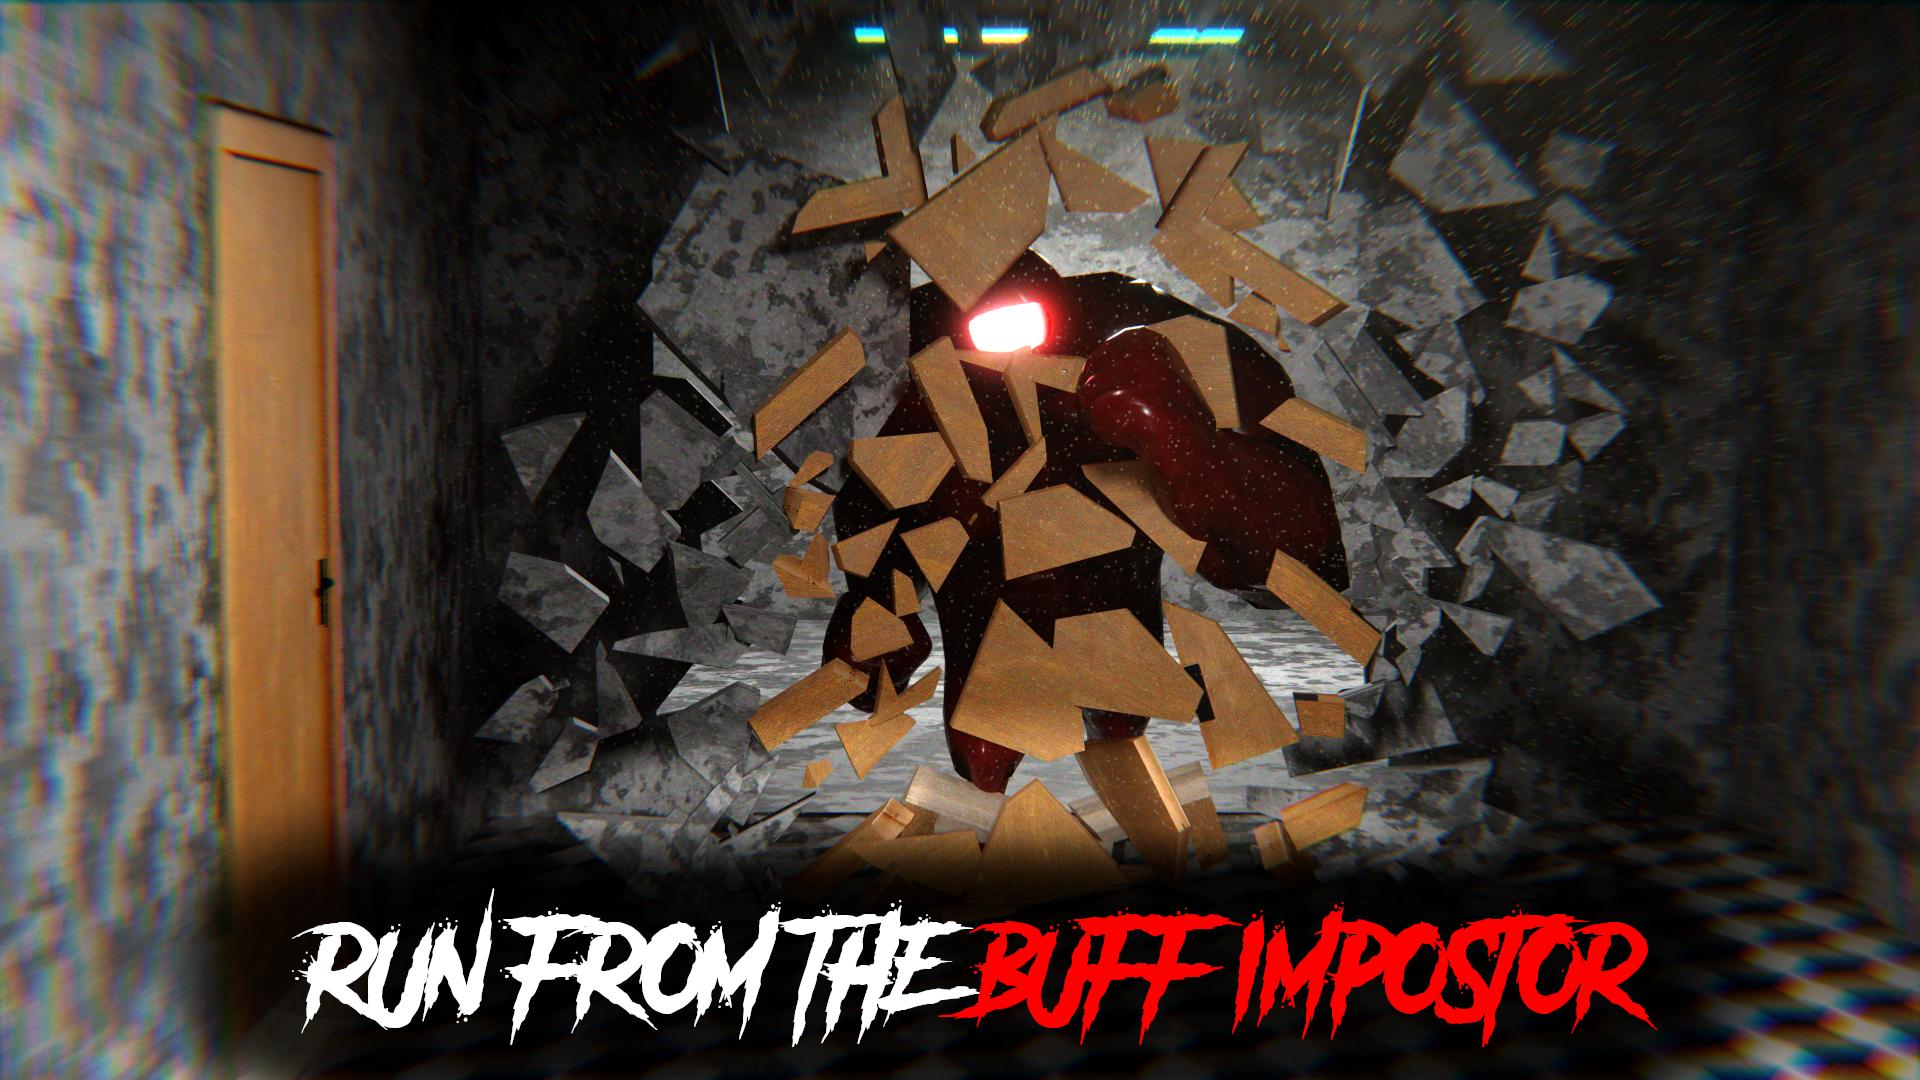 Buff Imposter for Android - APK Download